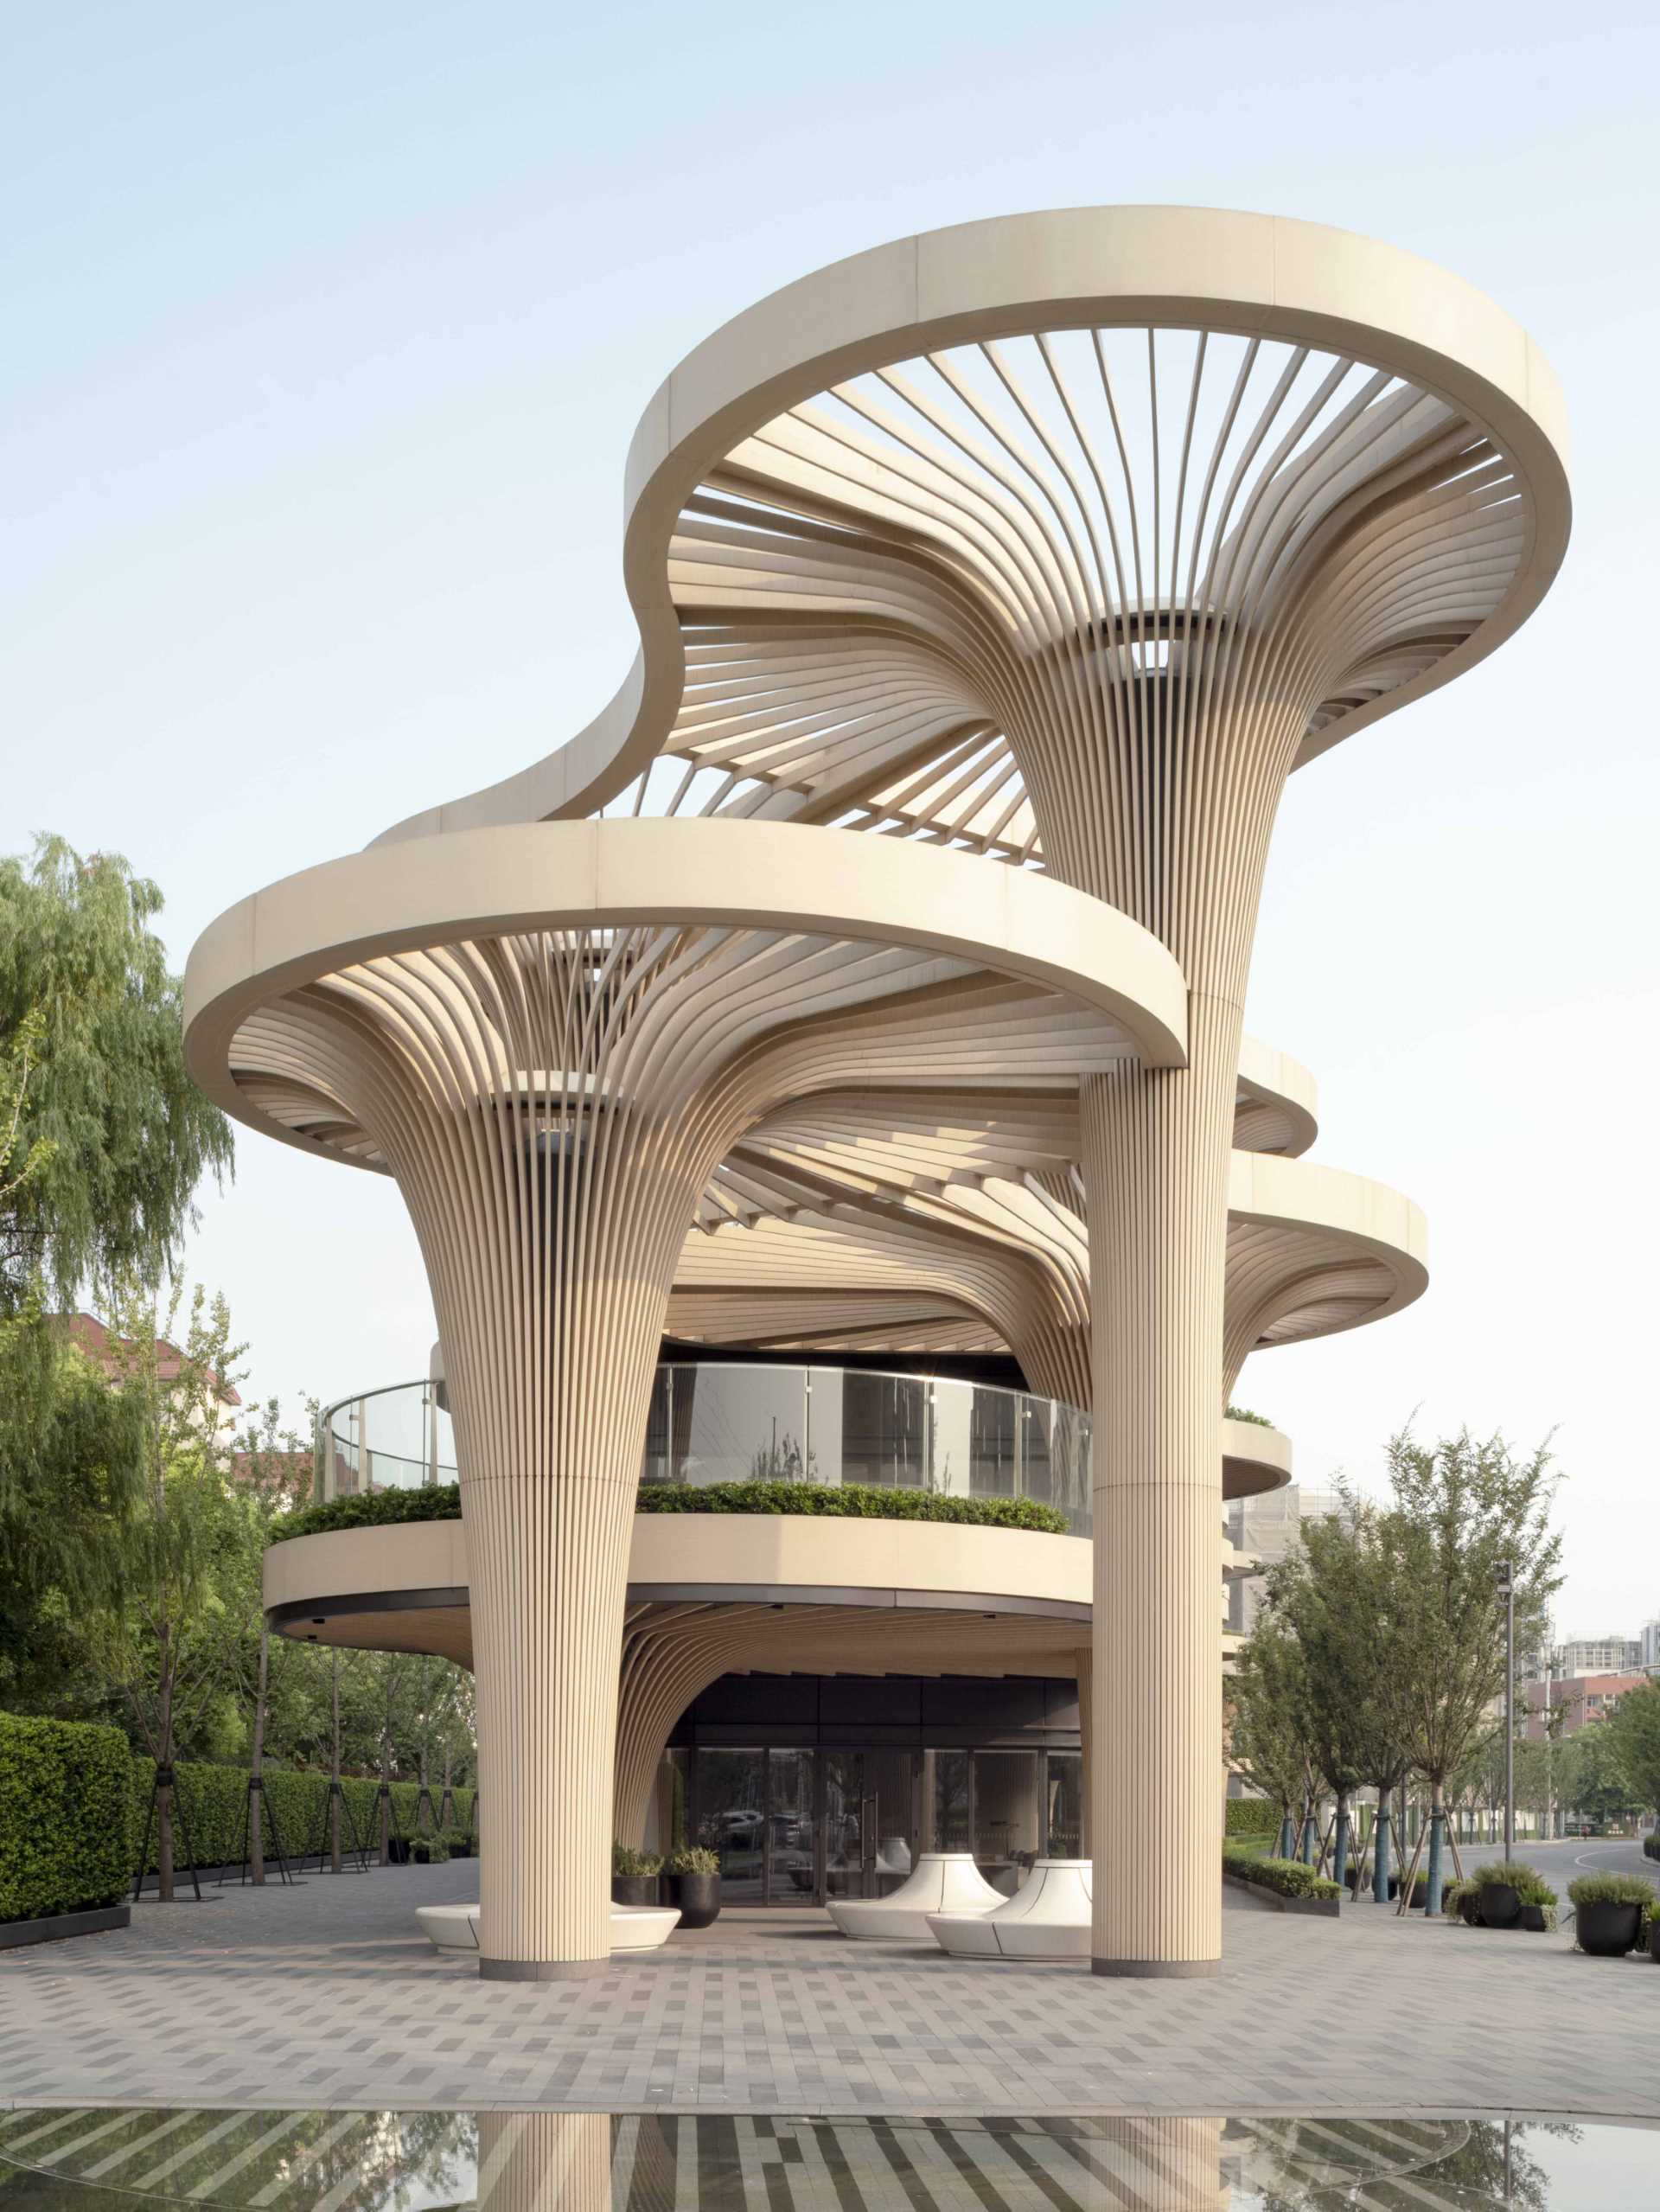 A modern building whose design has been inspired by trees.